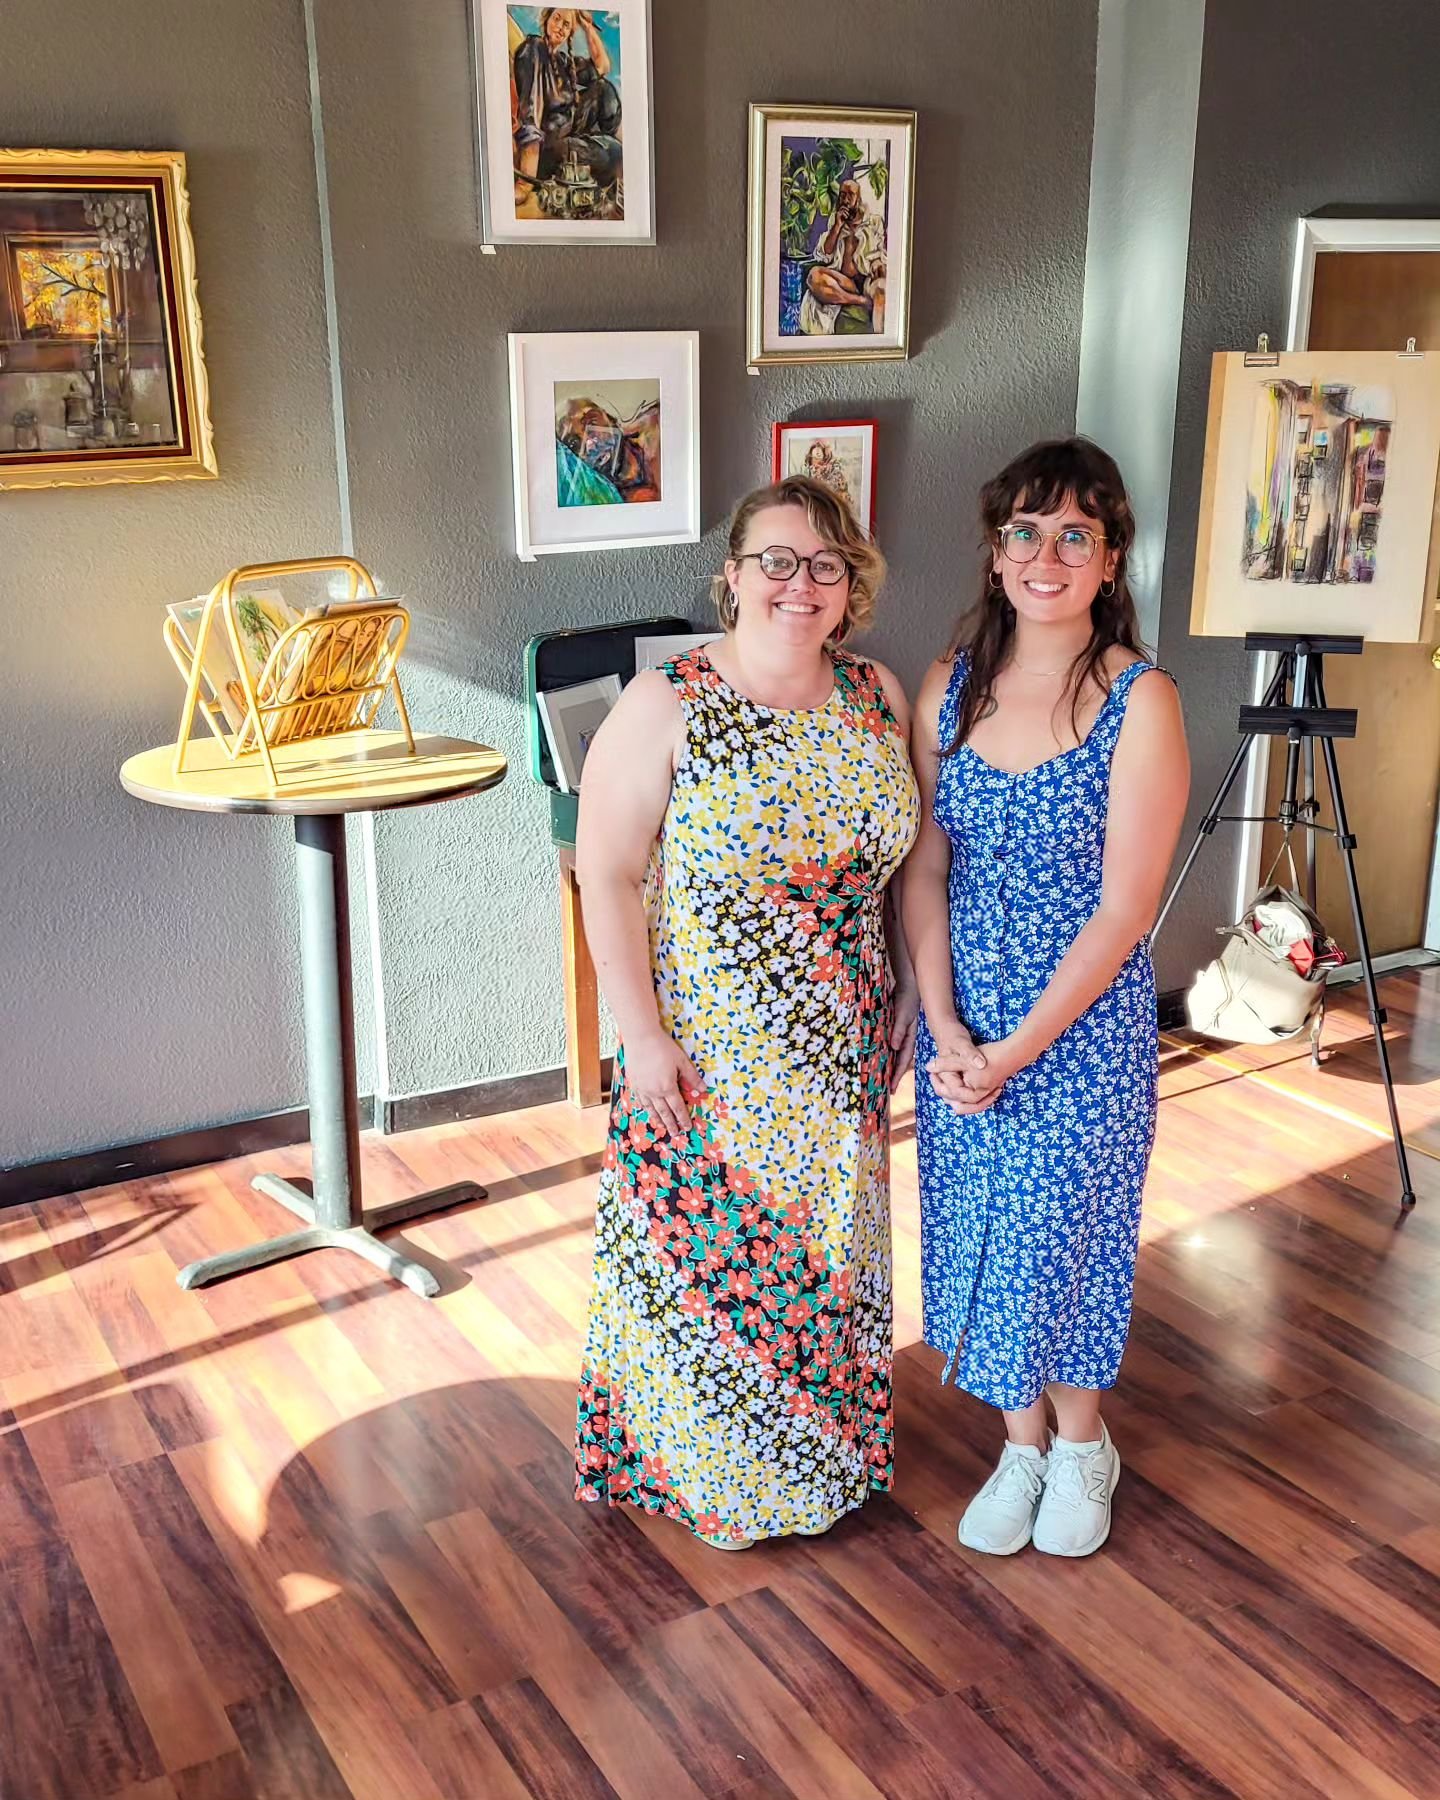 The second @downtownmhkart Art Walk was an absolute delight! Special thanks to @h.hnizdil who made it all come together (again!) 

I had a lovely time sharing my work with everyone, and I felt very happy with how many of my more personal works were p